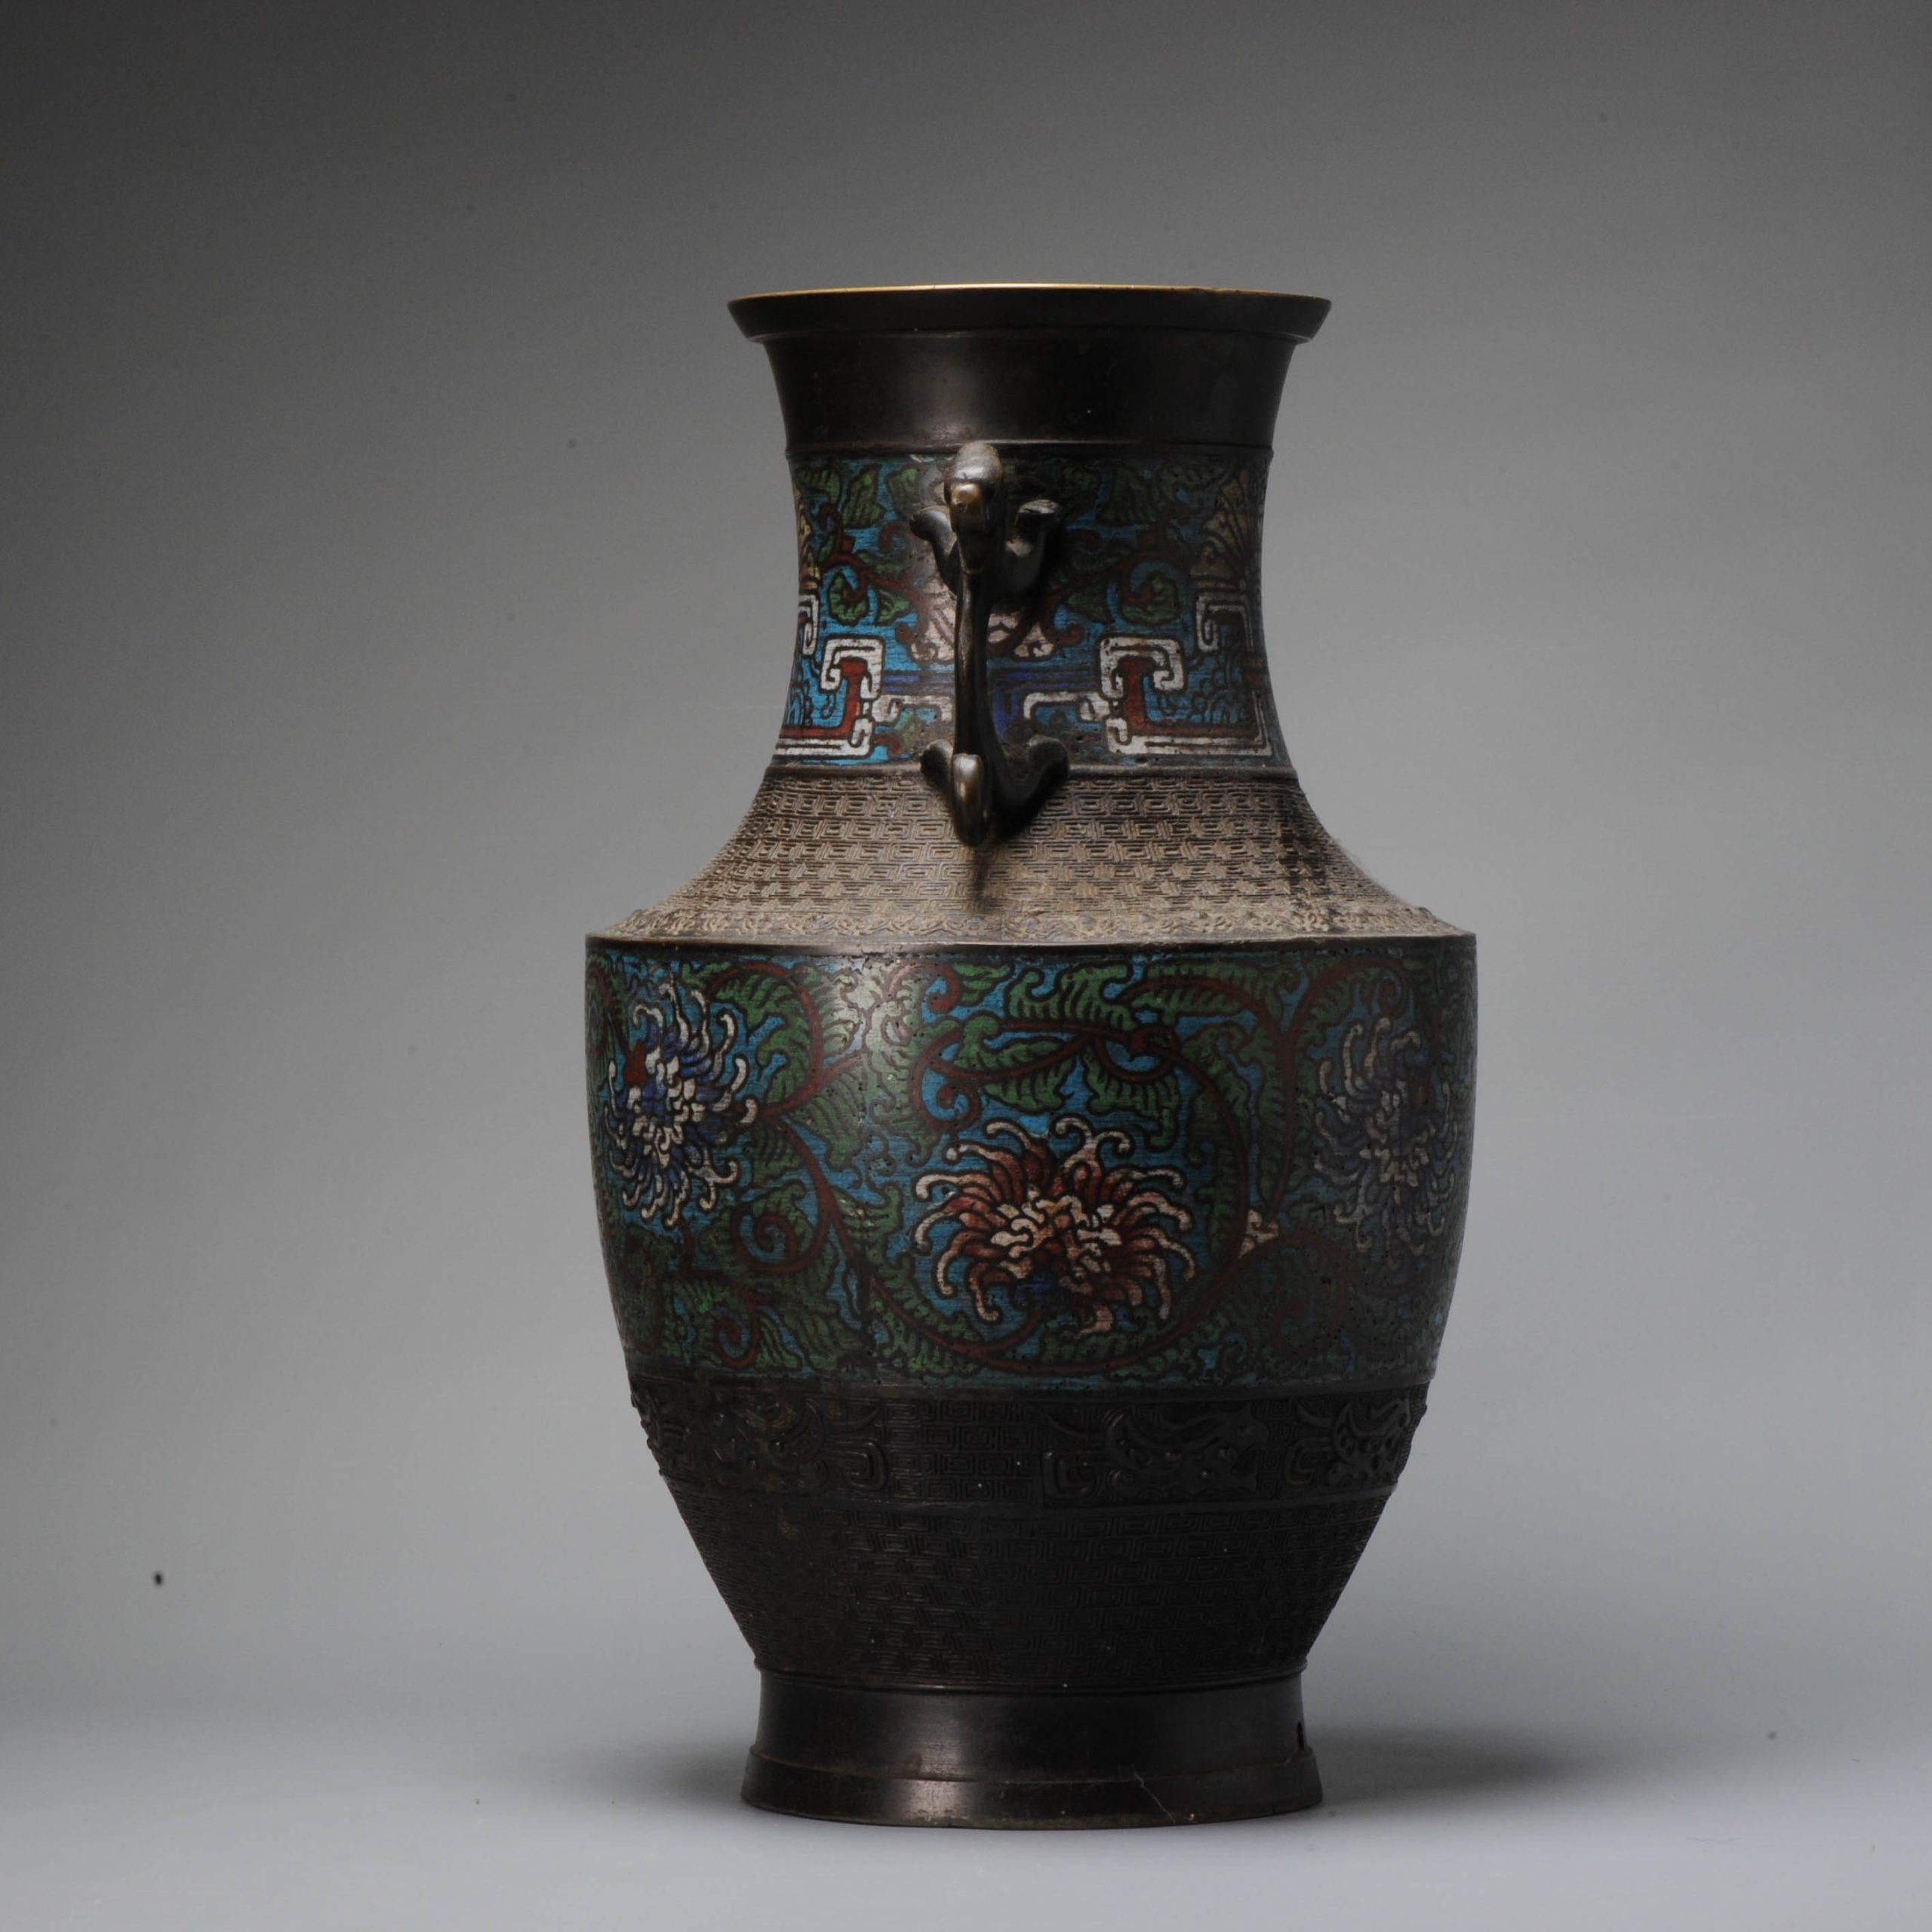 Nice Quality with superb decoration.

Additional information:
Material: Bronze, Cloisonne & Metal
Region of Origin: China
Period: 19th century, 20th century Qing (1661 - 1912)
Condition: Just some usual ware/patina. Hole in the base.
Dimension: 37 H